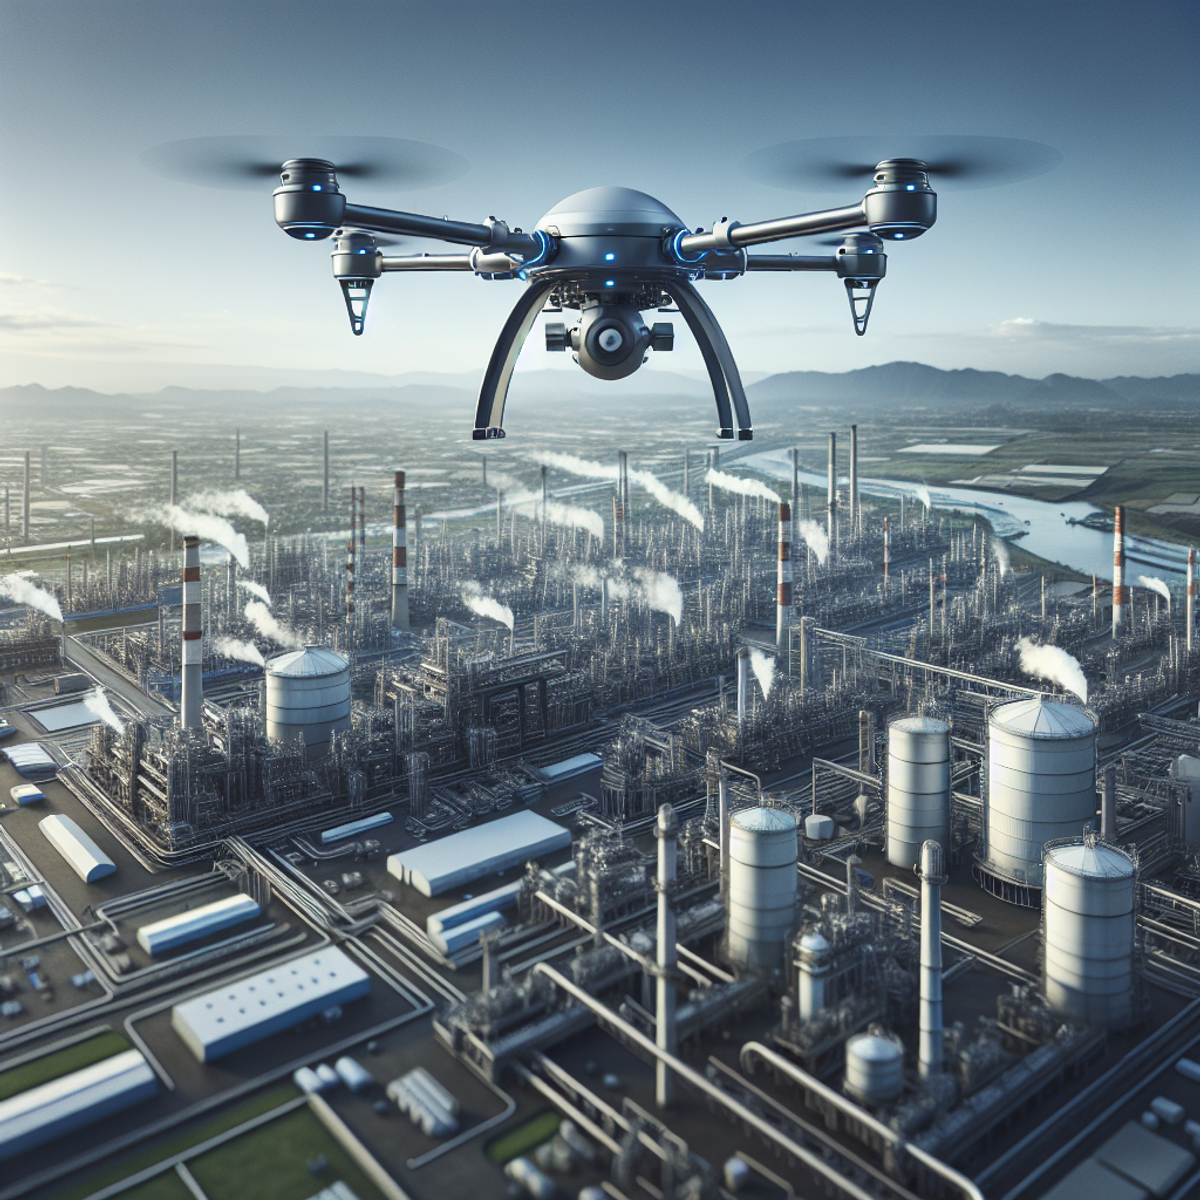 A modern drone flying high above an industrial complex, with sensor arrays detecting potential hazards.